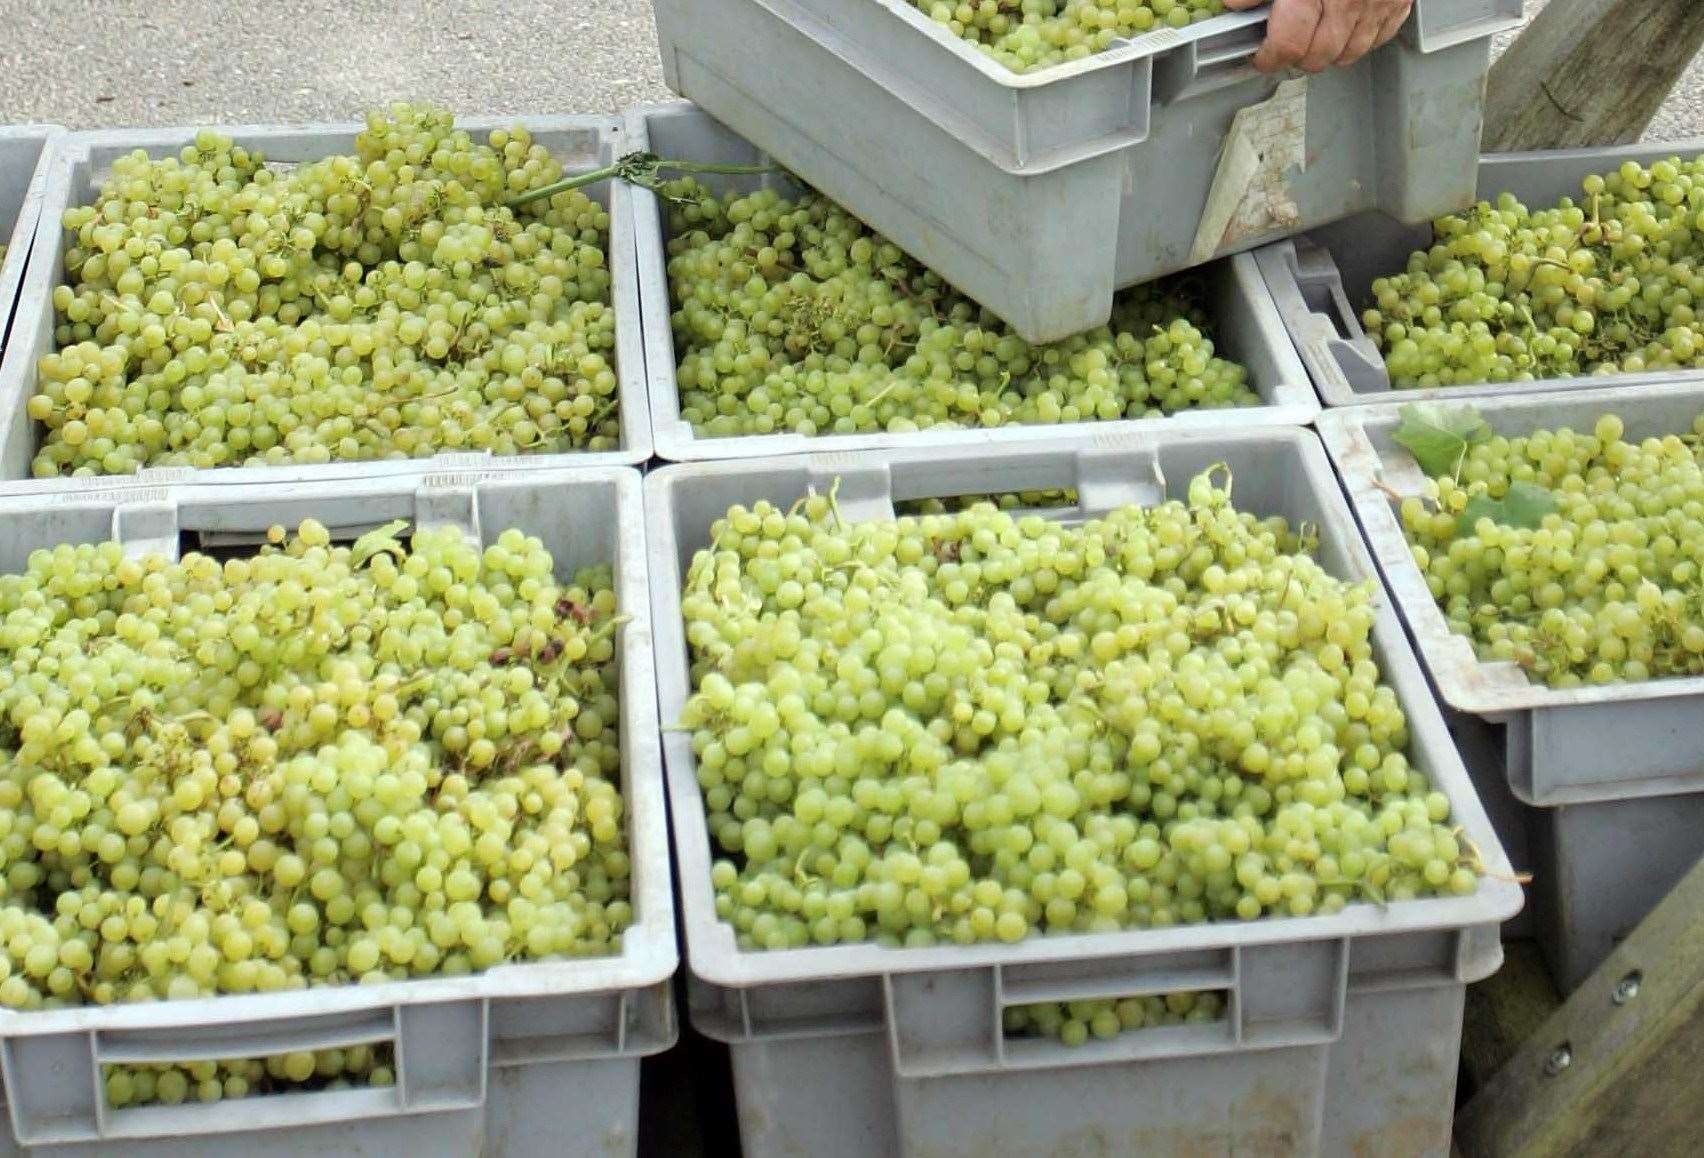 The grapes lost in the packing process will be turned into a premium gin